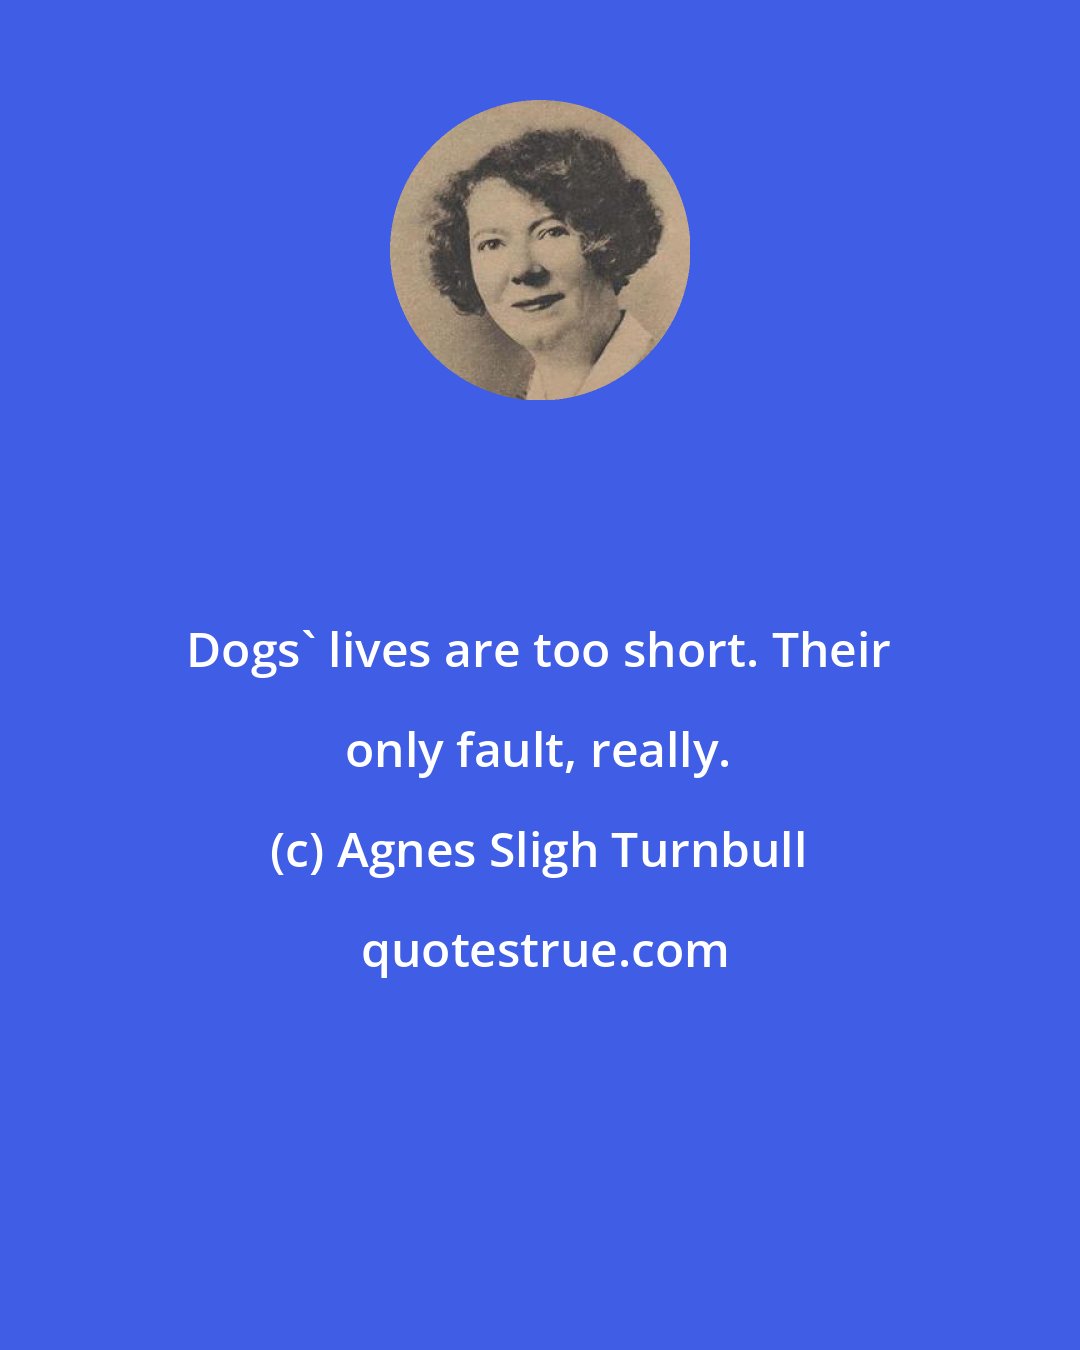 Agnes Sligh Turnbull: Dogs' lives are too short. Their only fault, really.